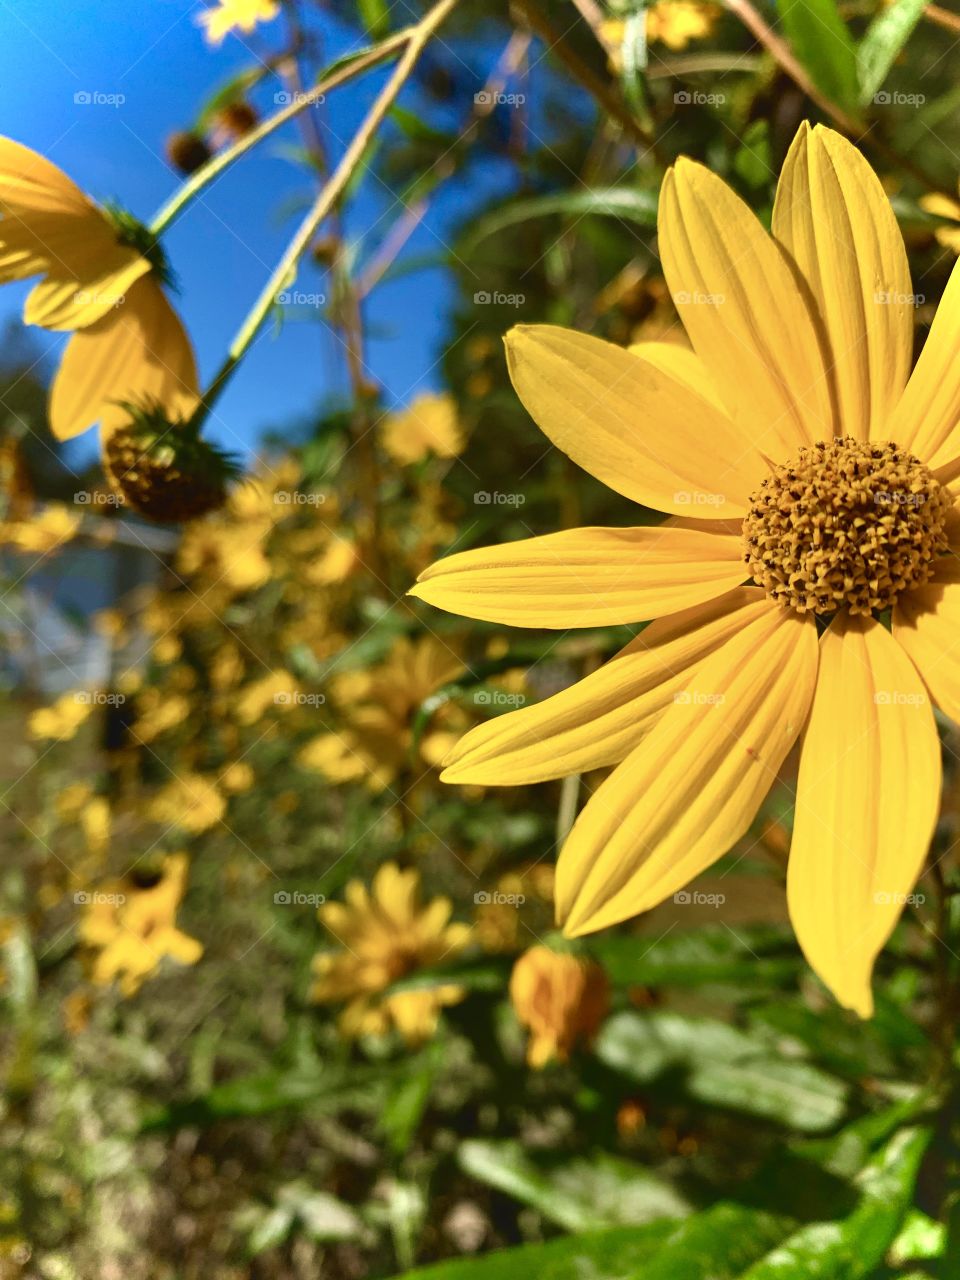 Closeup of a yellow daisy among many others around it with a bright blue sky above.